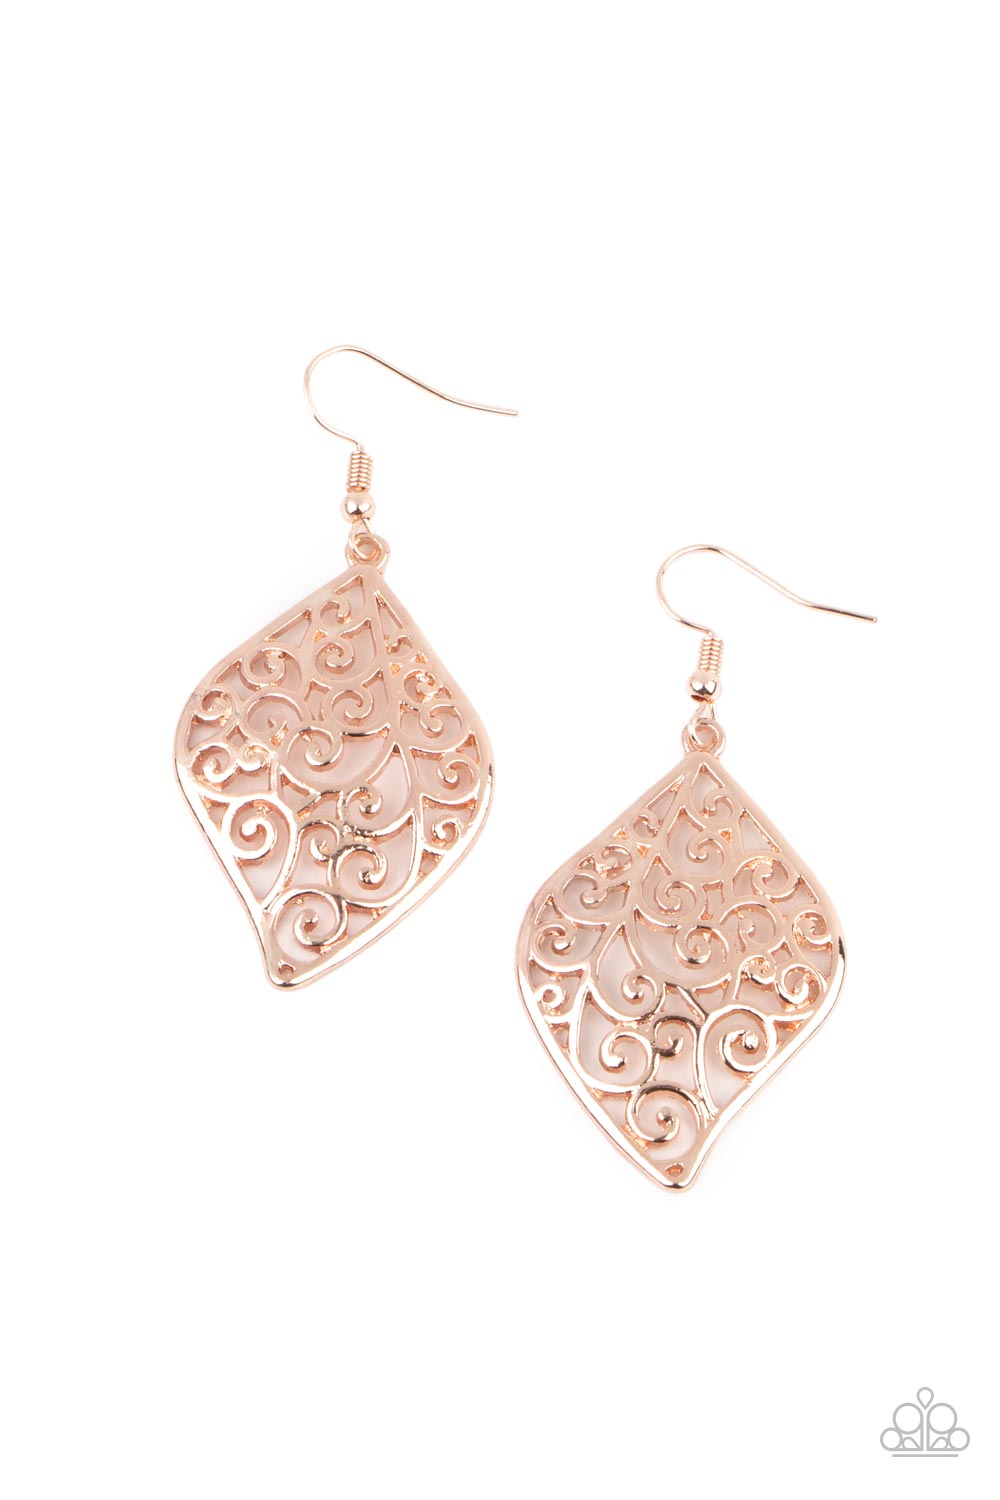 Paparazzi Accessories: Your Vine Or Mine - Rose Gold